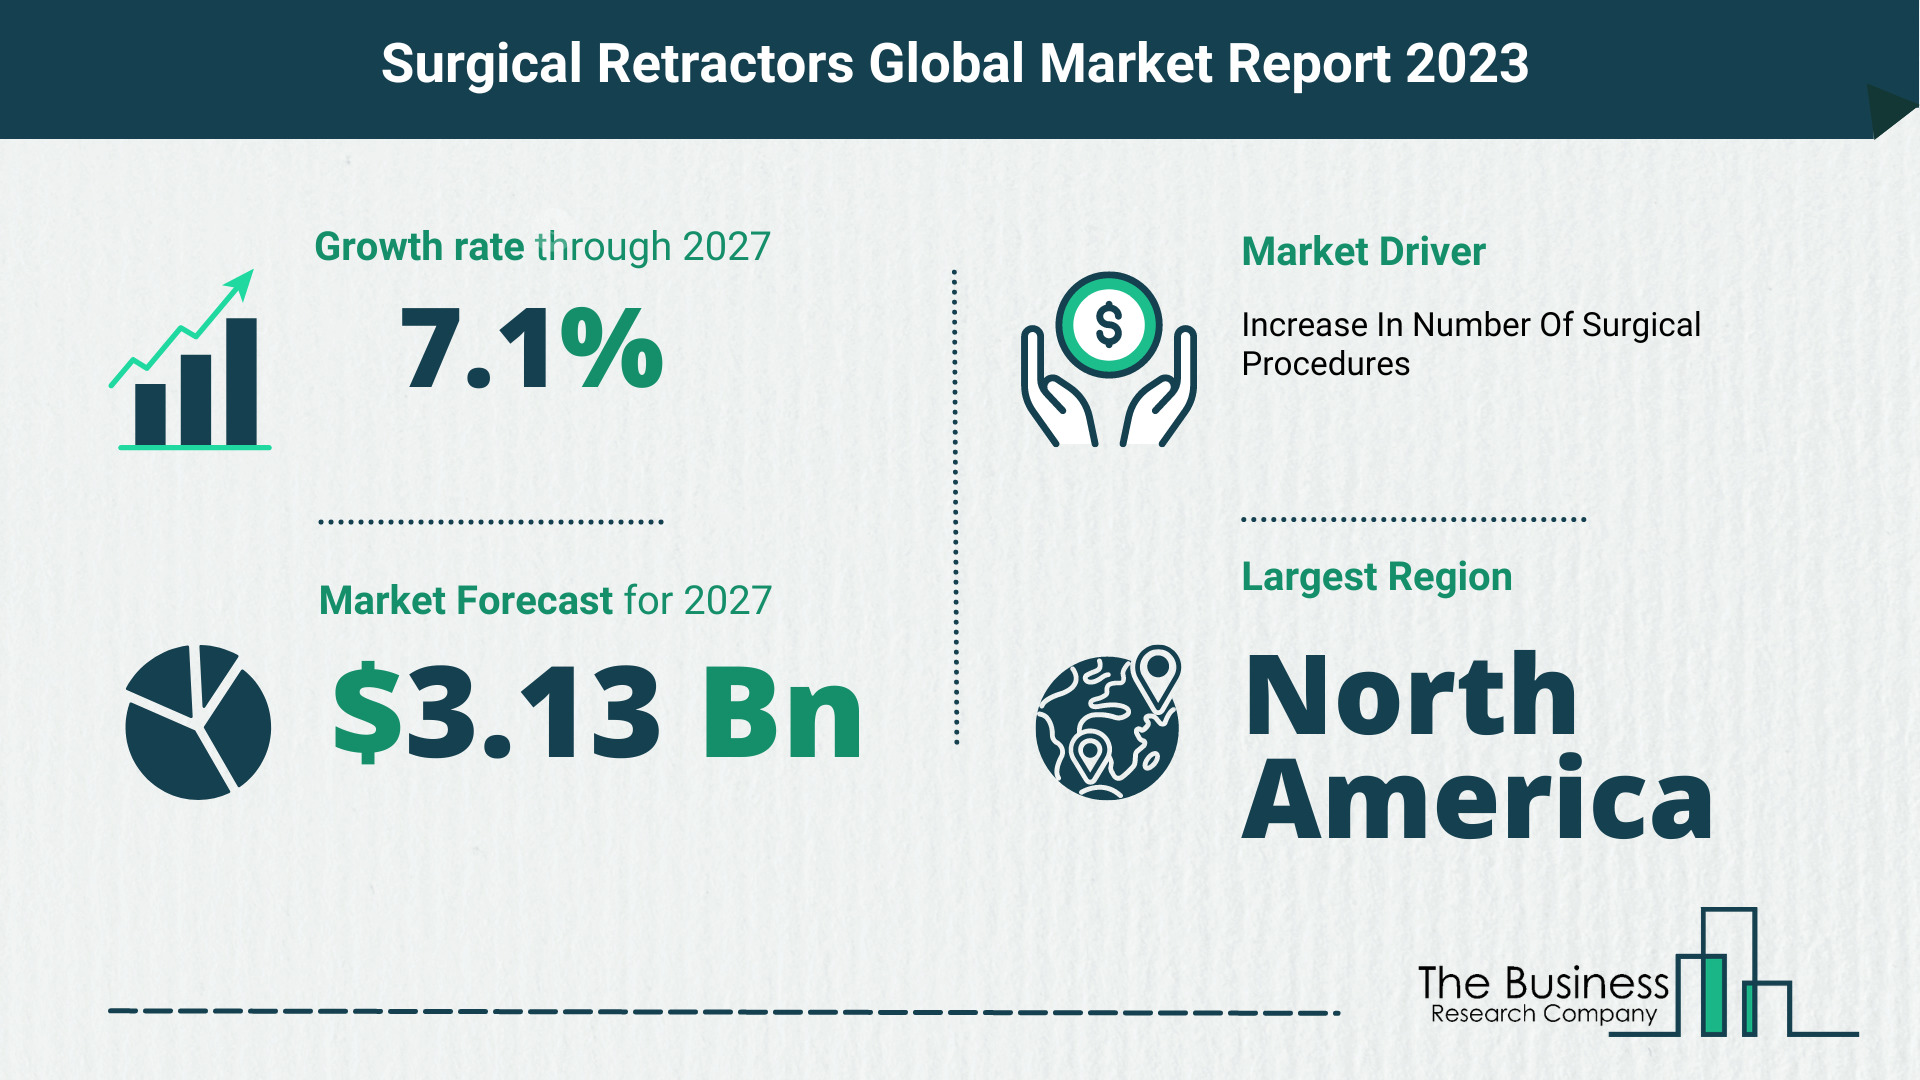 What Will The Surgical Retractors Market Look Like In 2023?